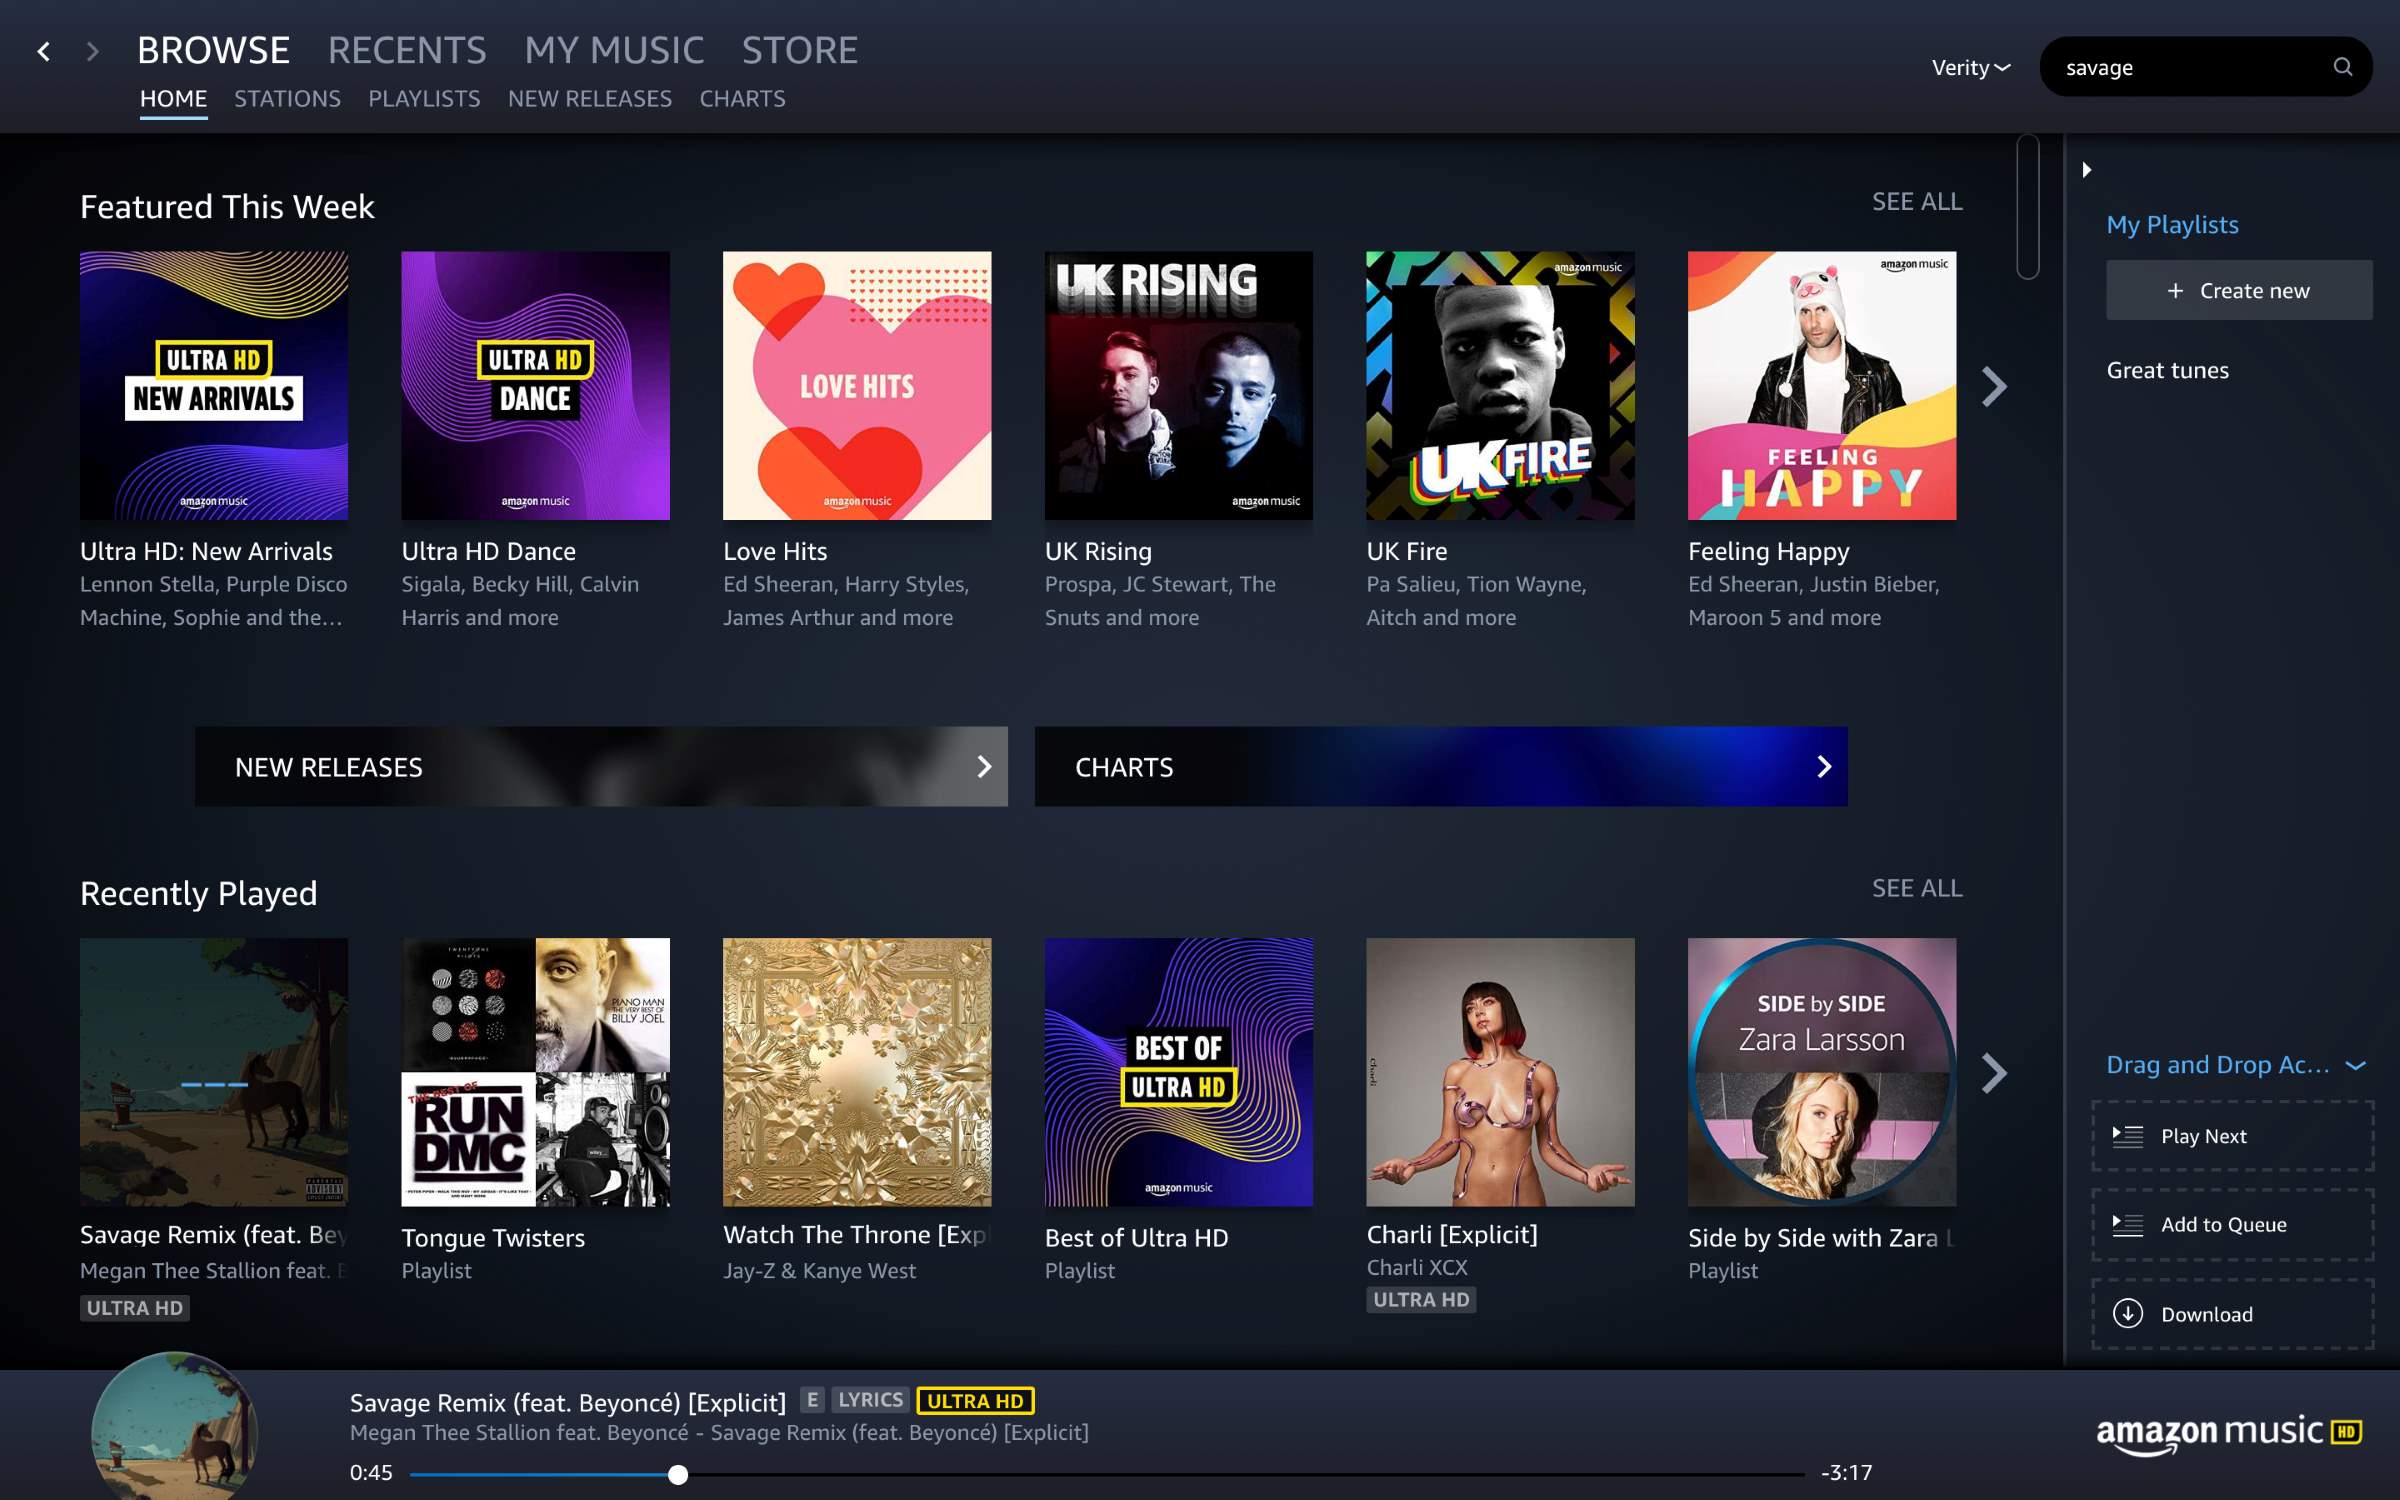 How To Log Out Of Amazon Music App